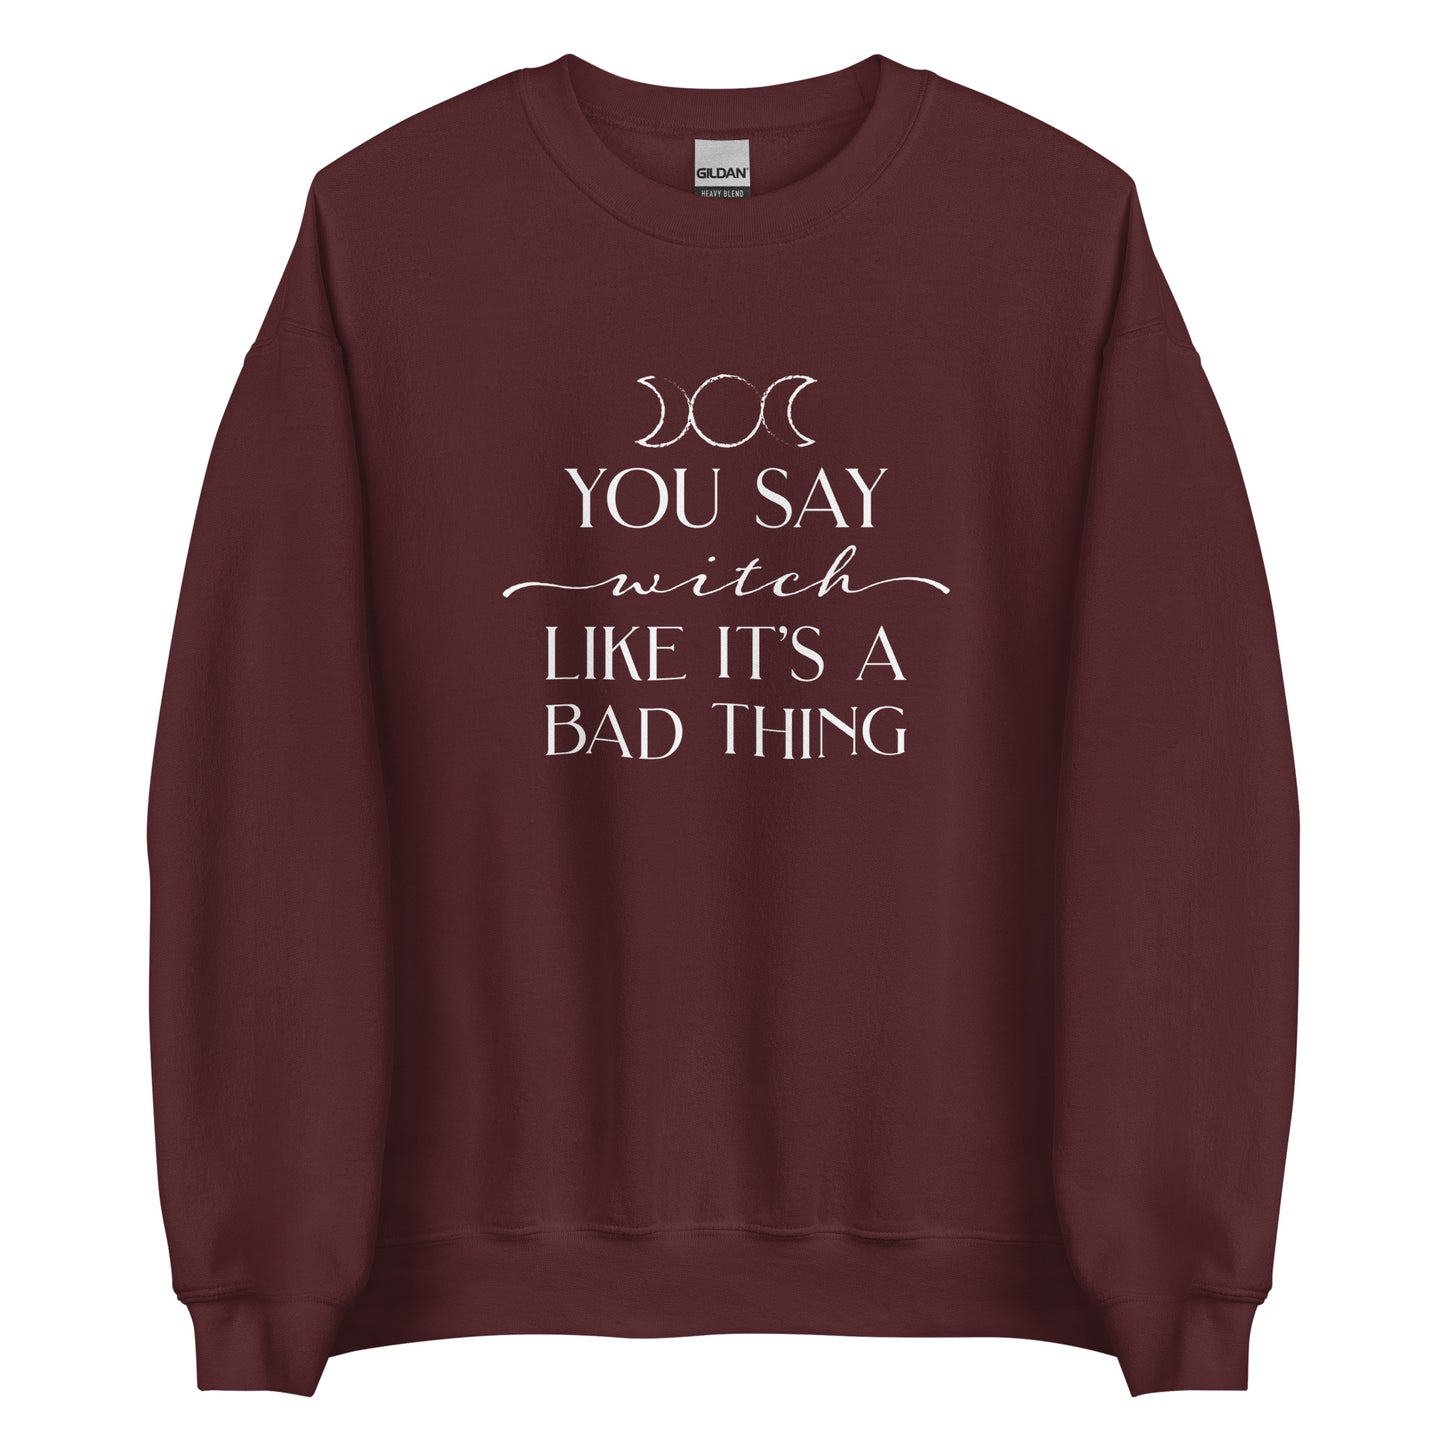 A maroon crewneck sweatshirt featuring the triple goddess symbol and text reading "You say witch like it's a bad thing"